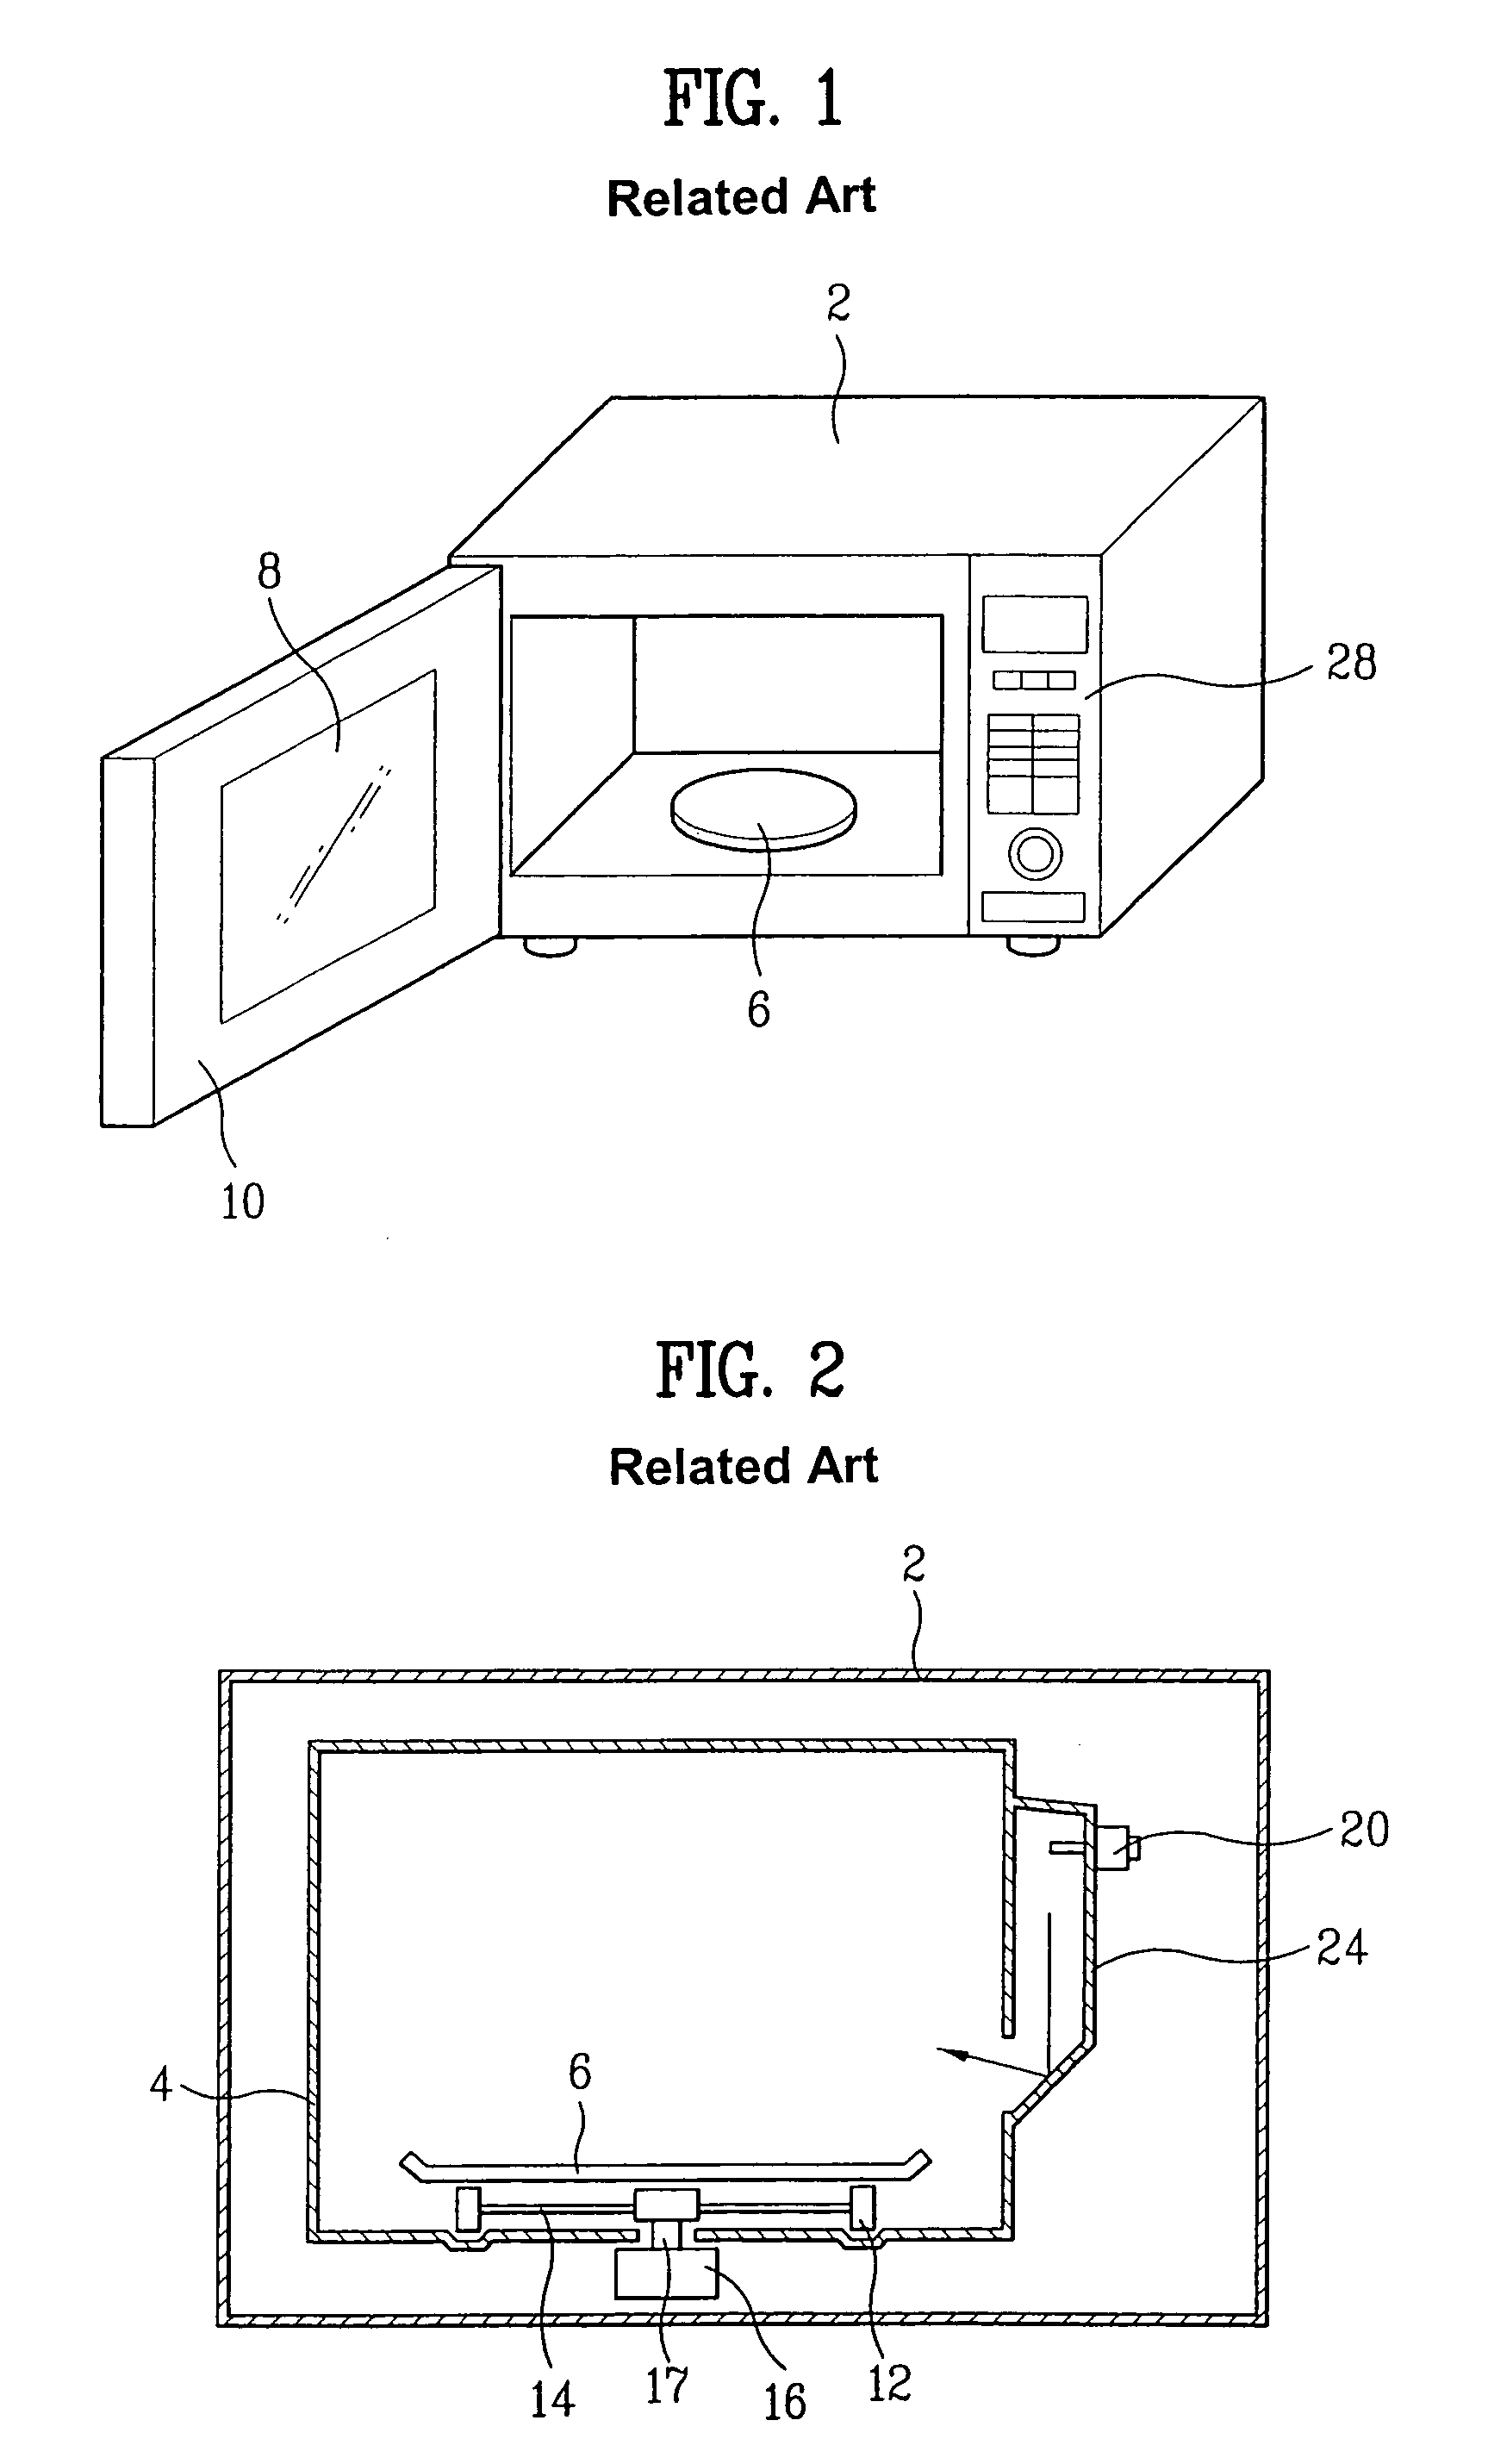 Microwave oven having a driving unit for moving and rotating an antenna